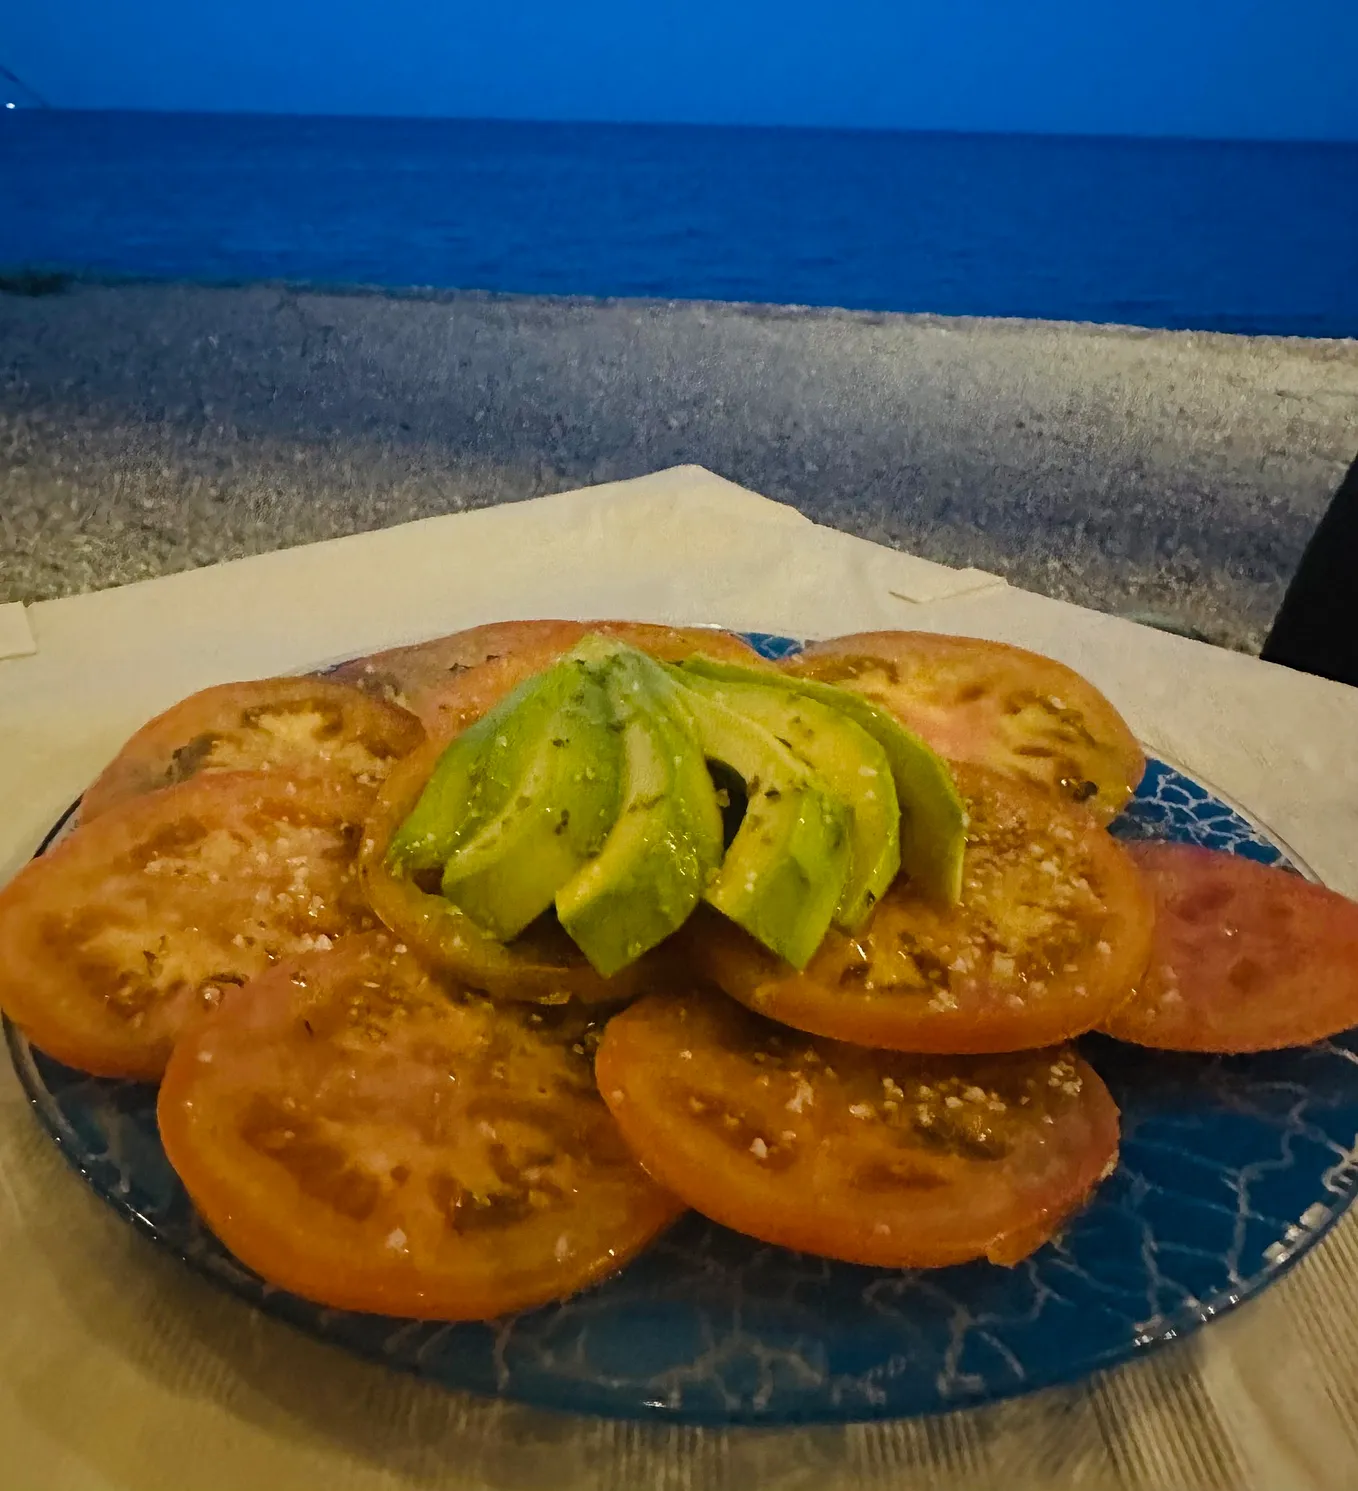 Tomato and avocado with a view.